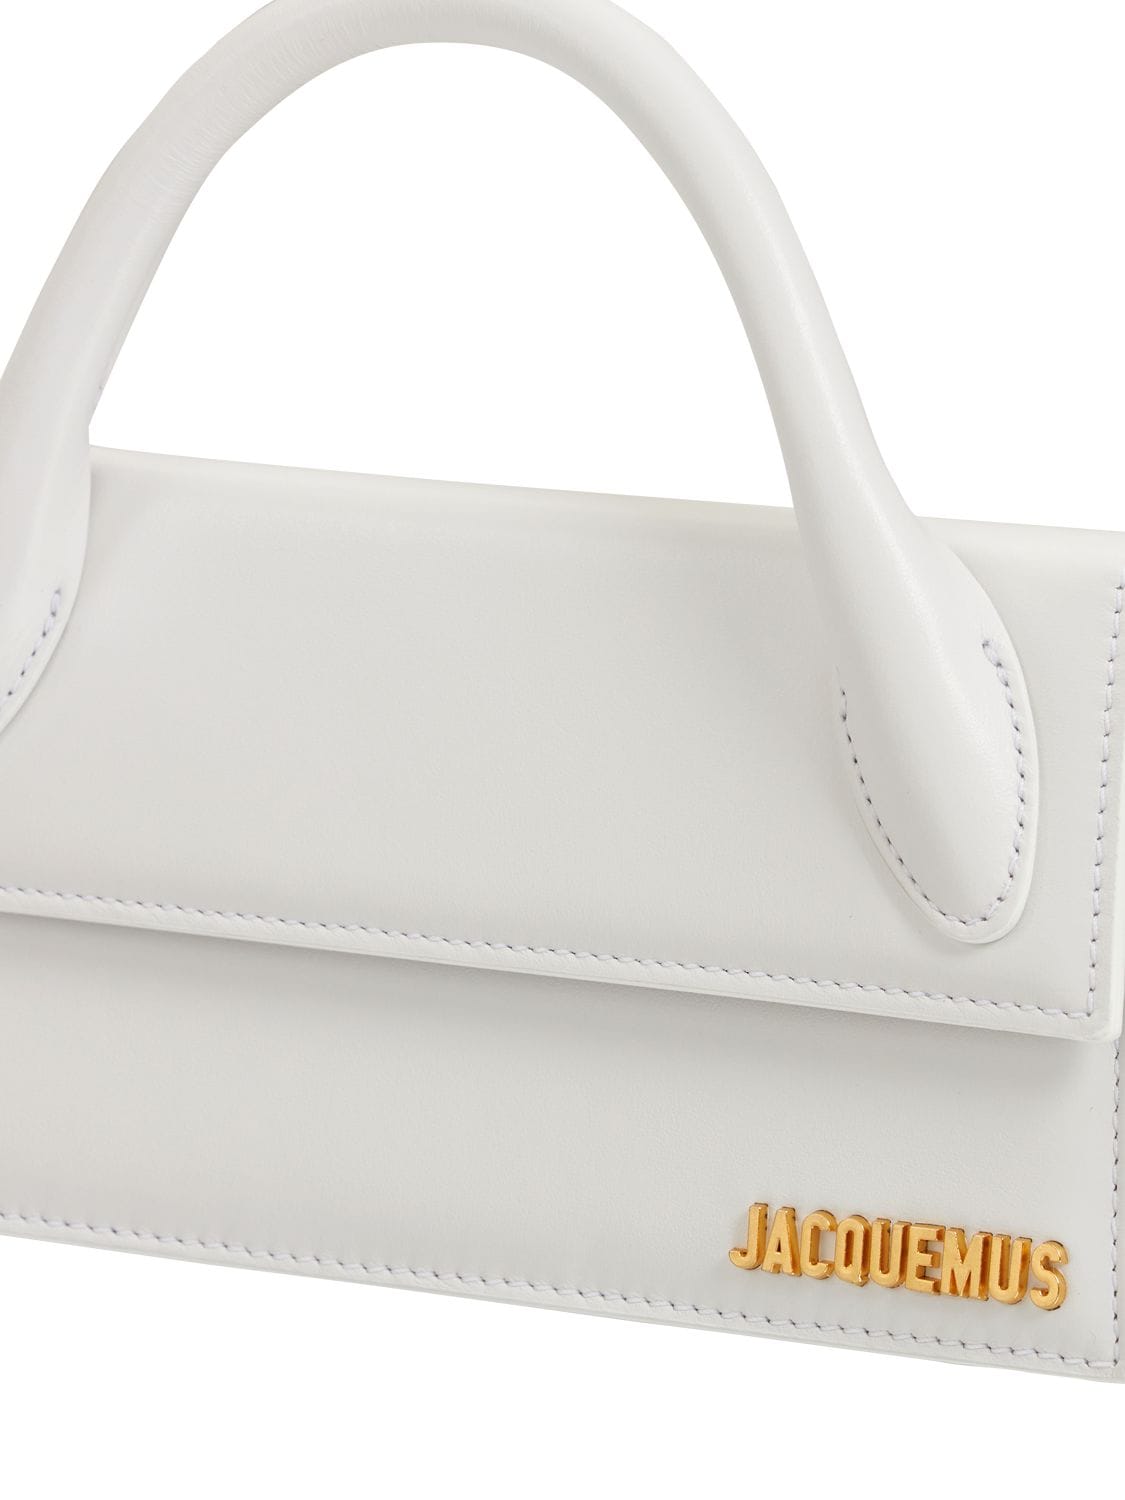 Jacquemus Le Chiquito Long Black Leather Top Handle Bag In White